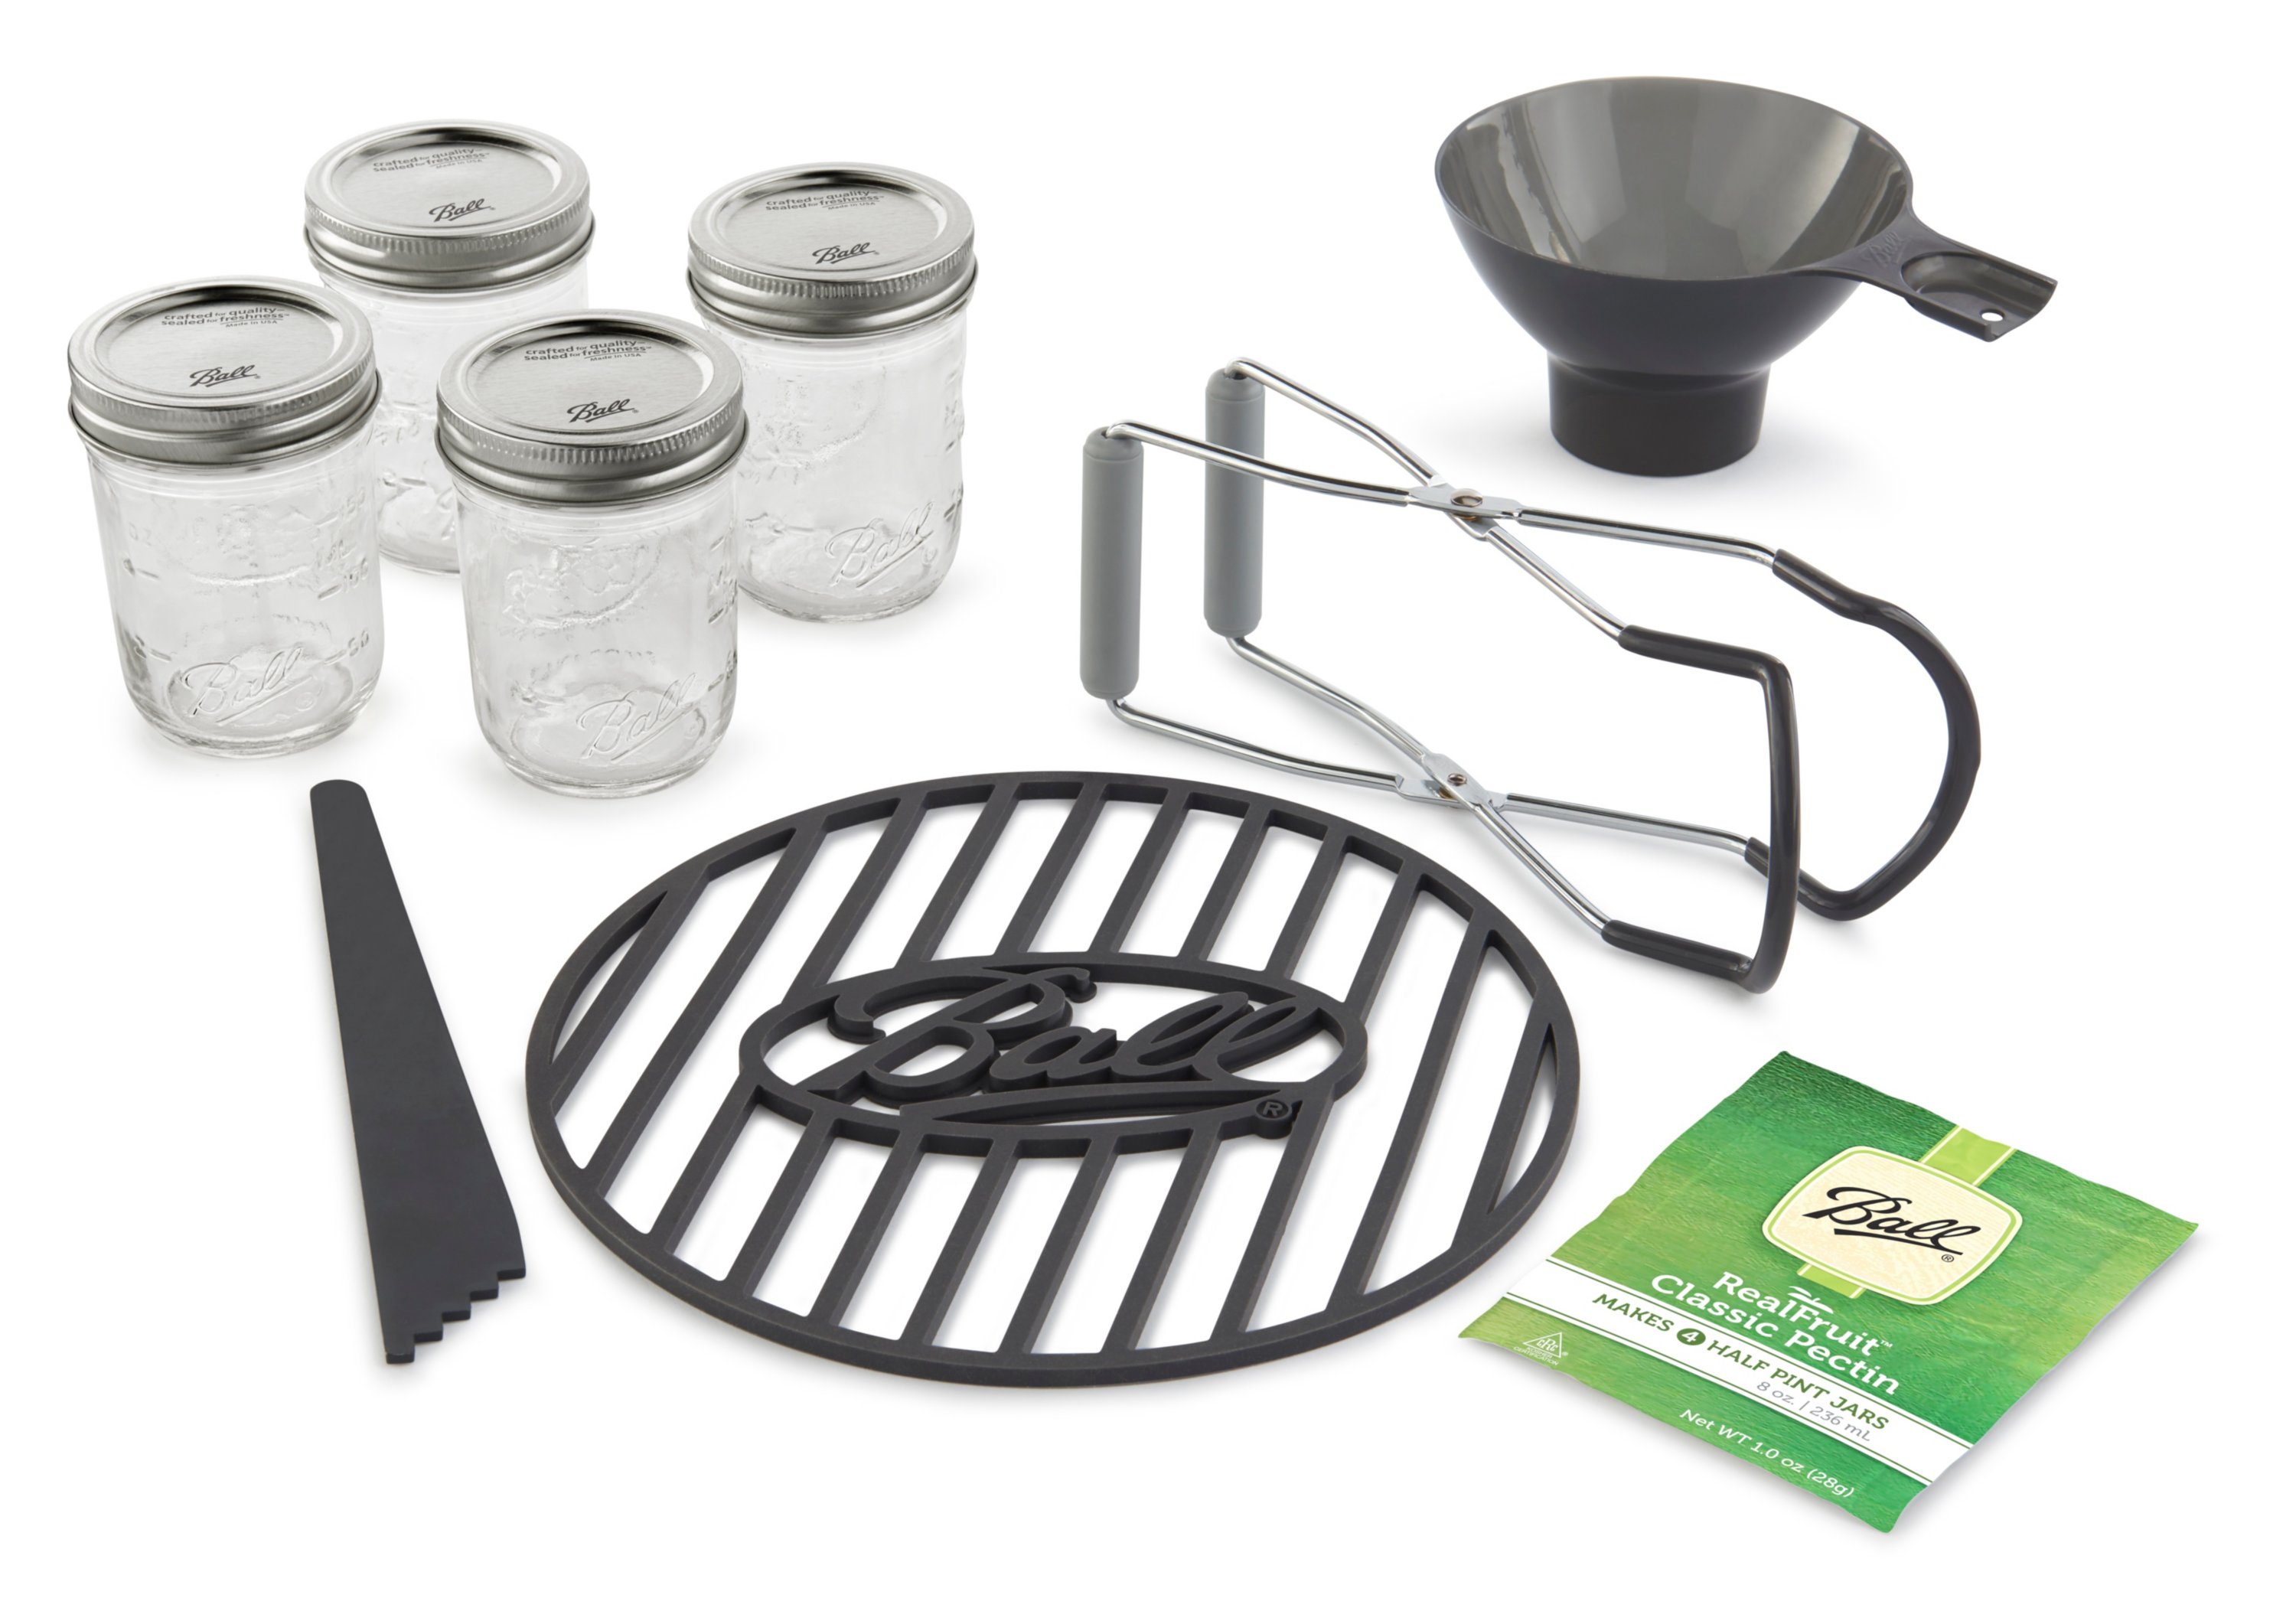 Canning Kit for Beginners 6-Piece Set Ball Canning Kit Tools, Green